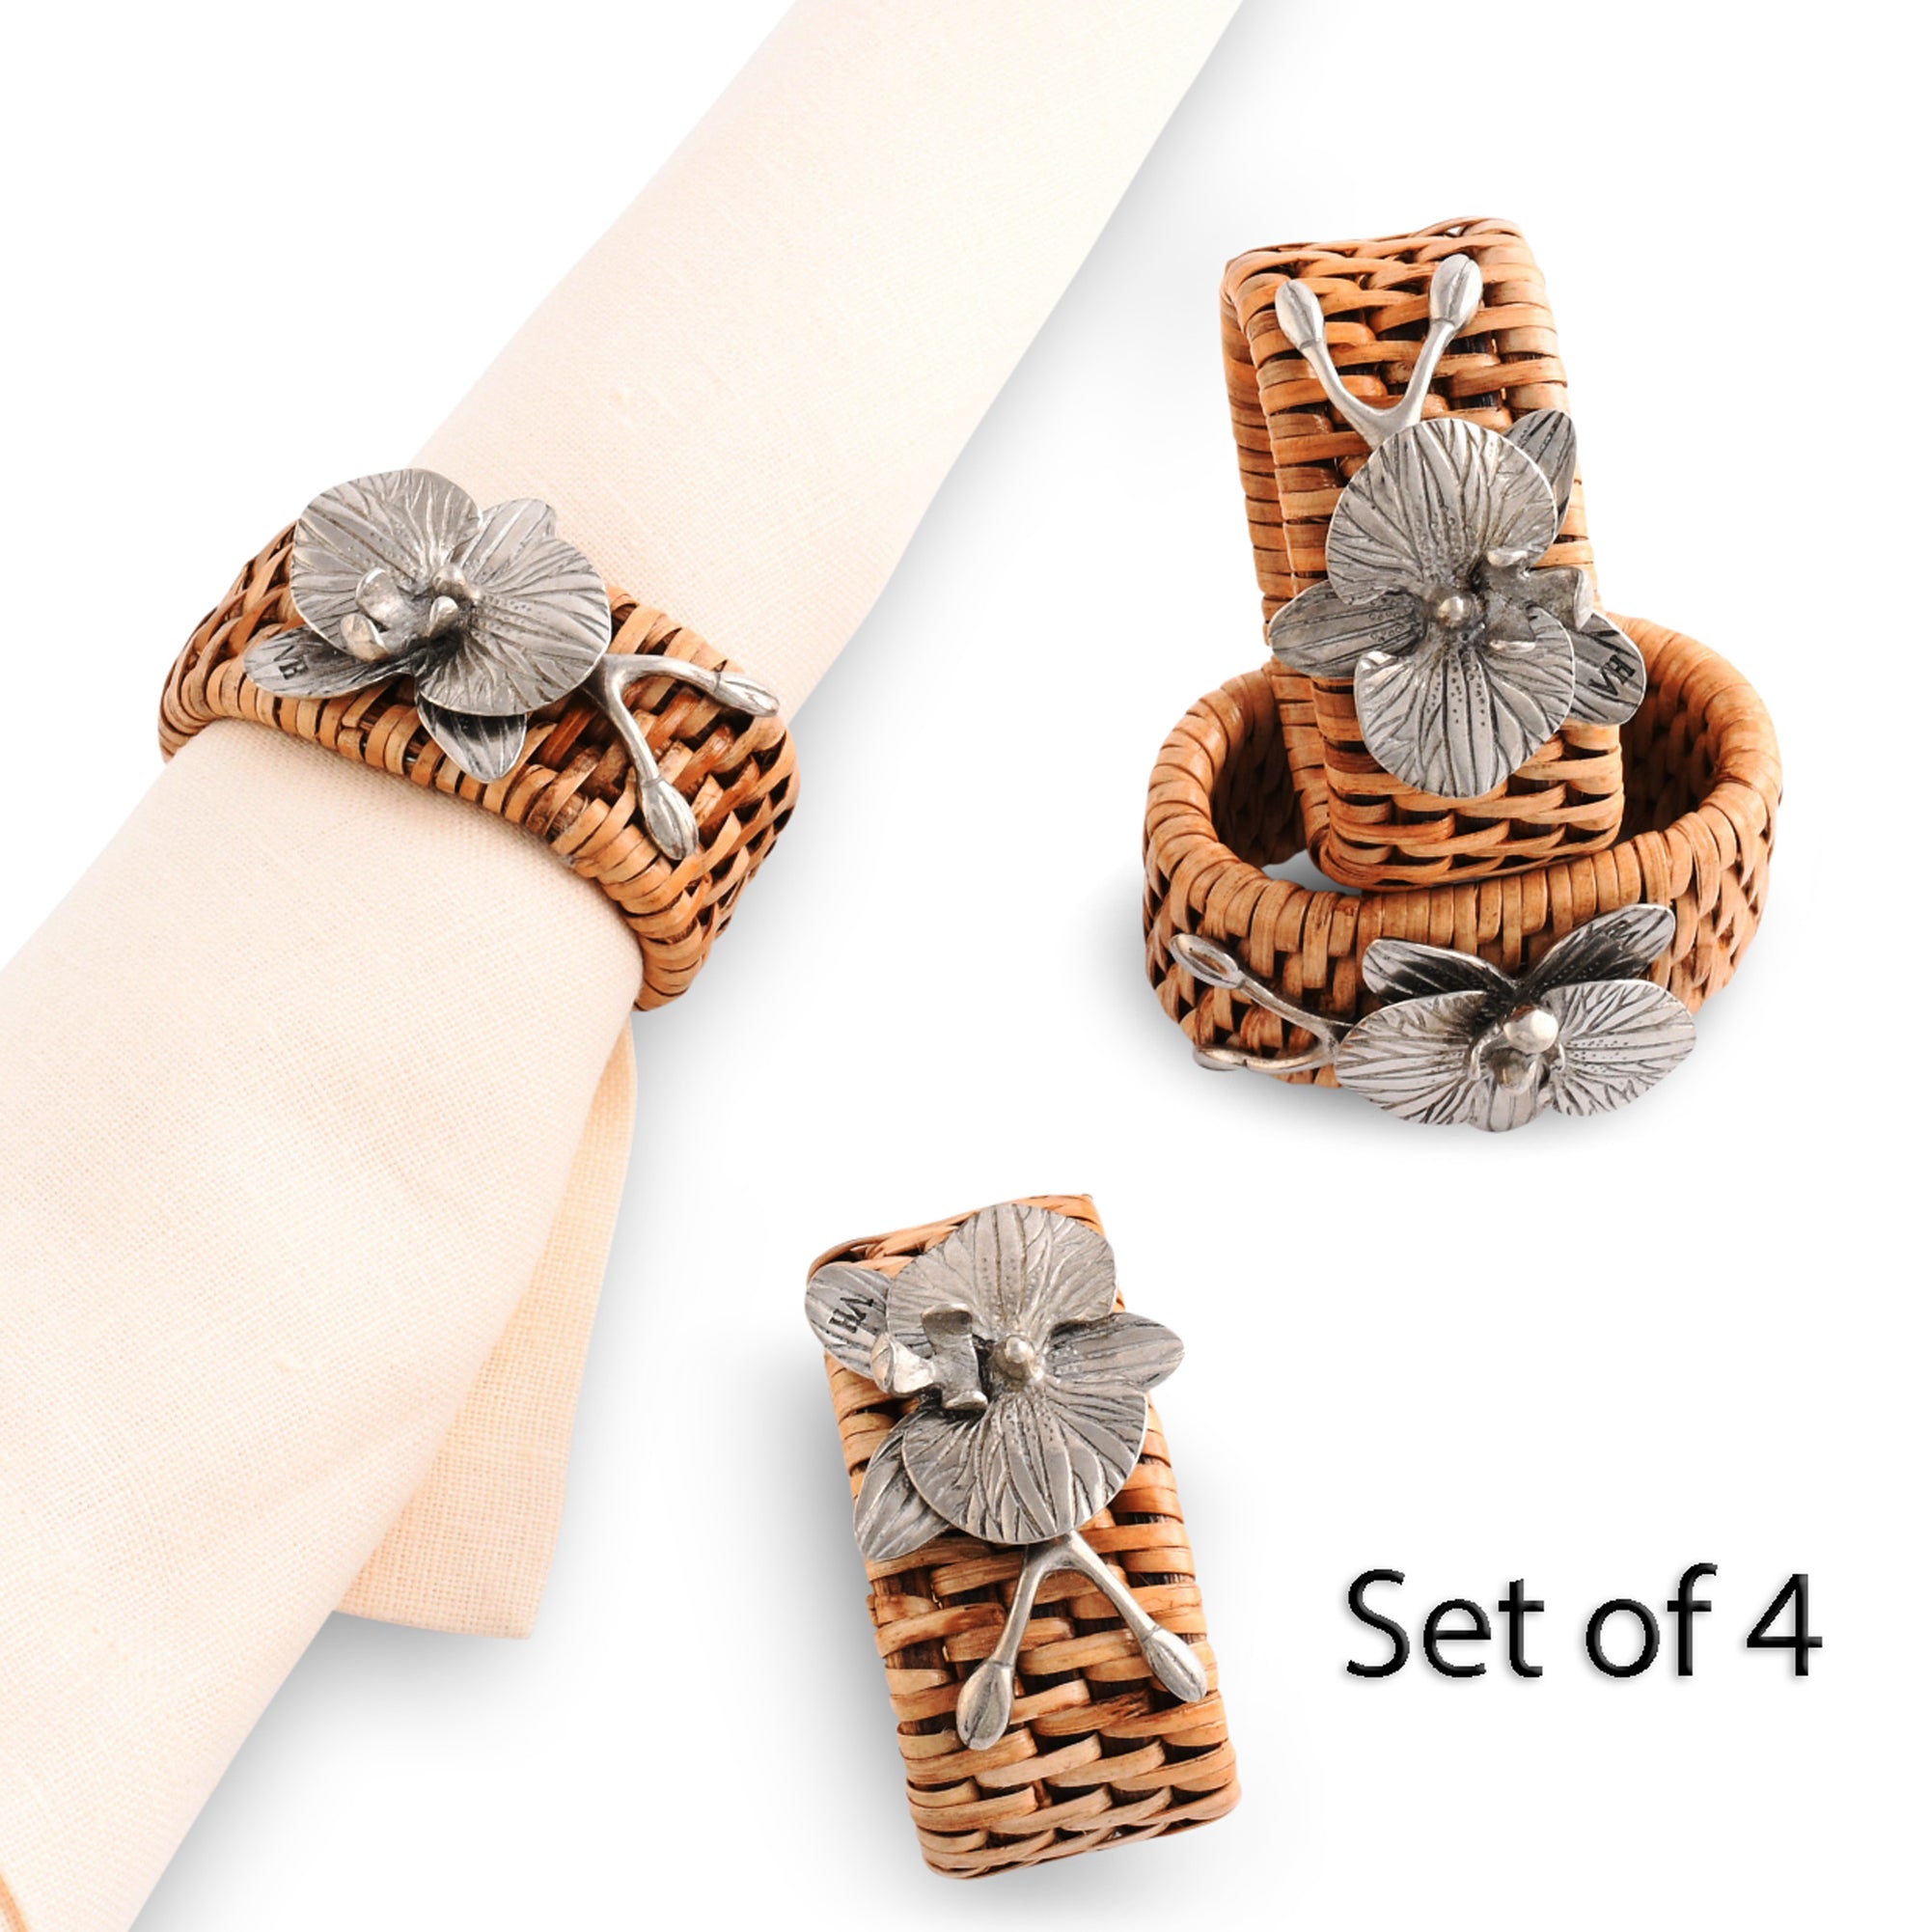 Vagabond House Orchid Hand Woven Wicker Rattan Napkin Ring - Set of 4 Product Image